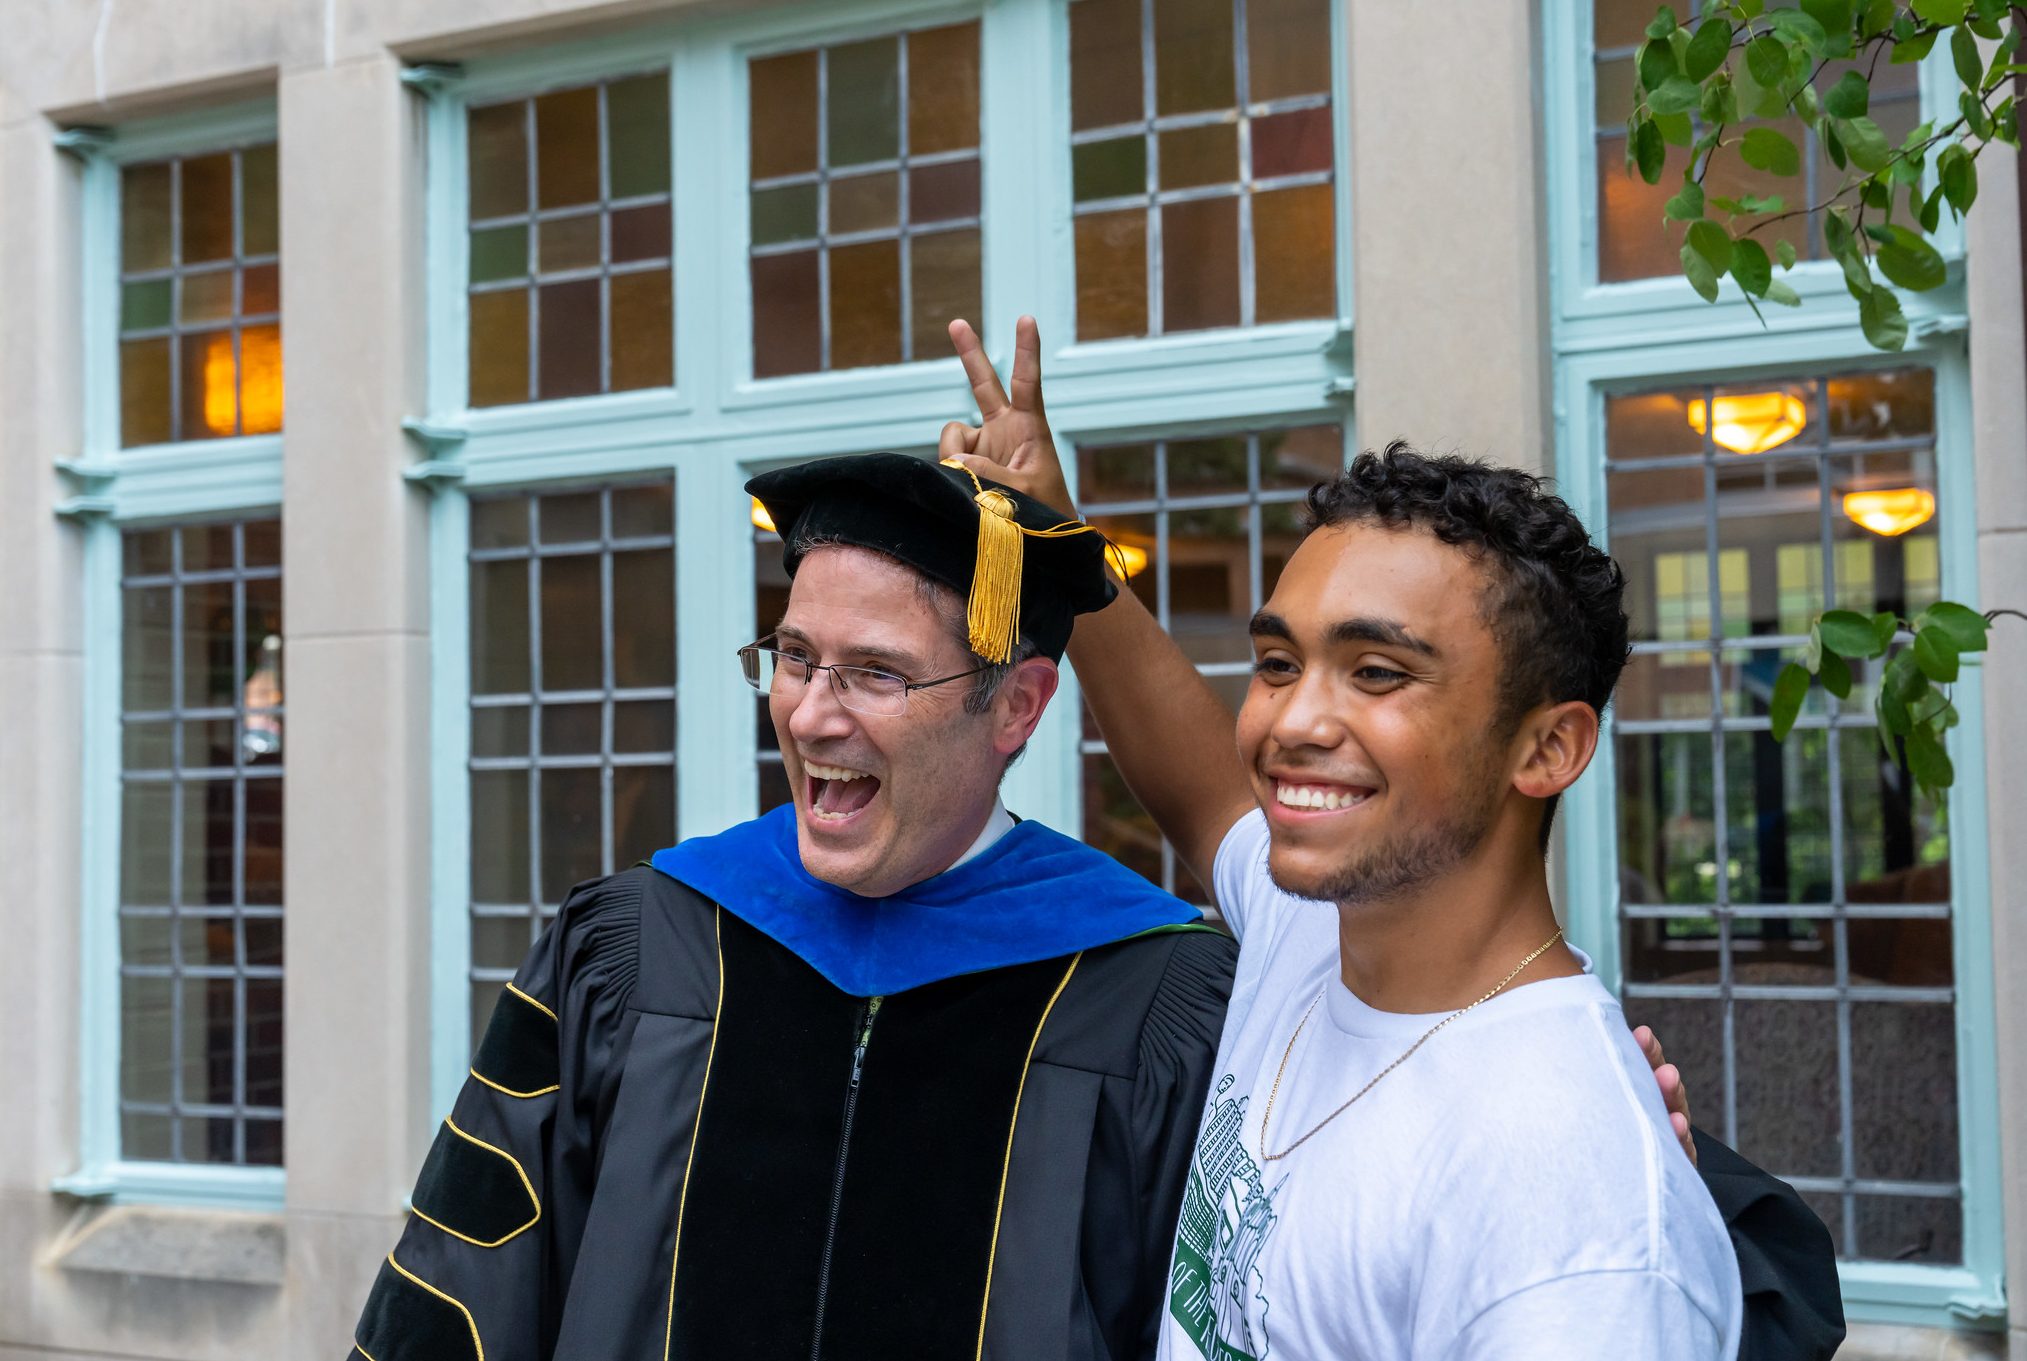 A student in a white t-shirt holds two fingers behind the head of a man in black PhD graduation robes.